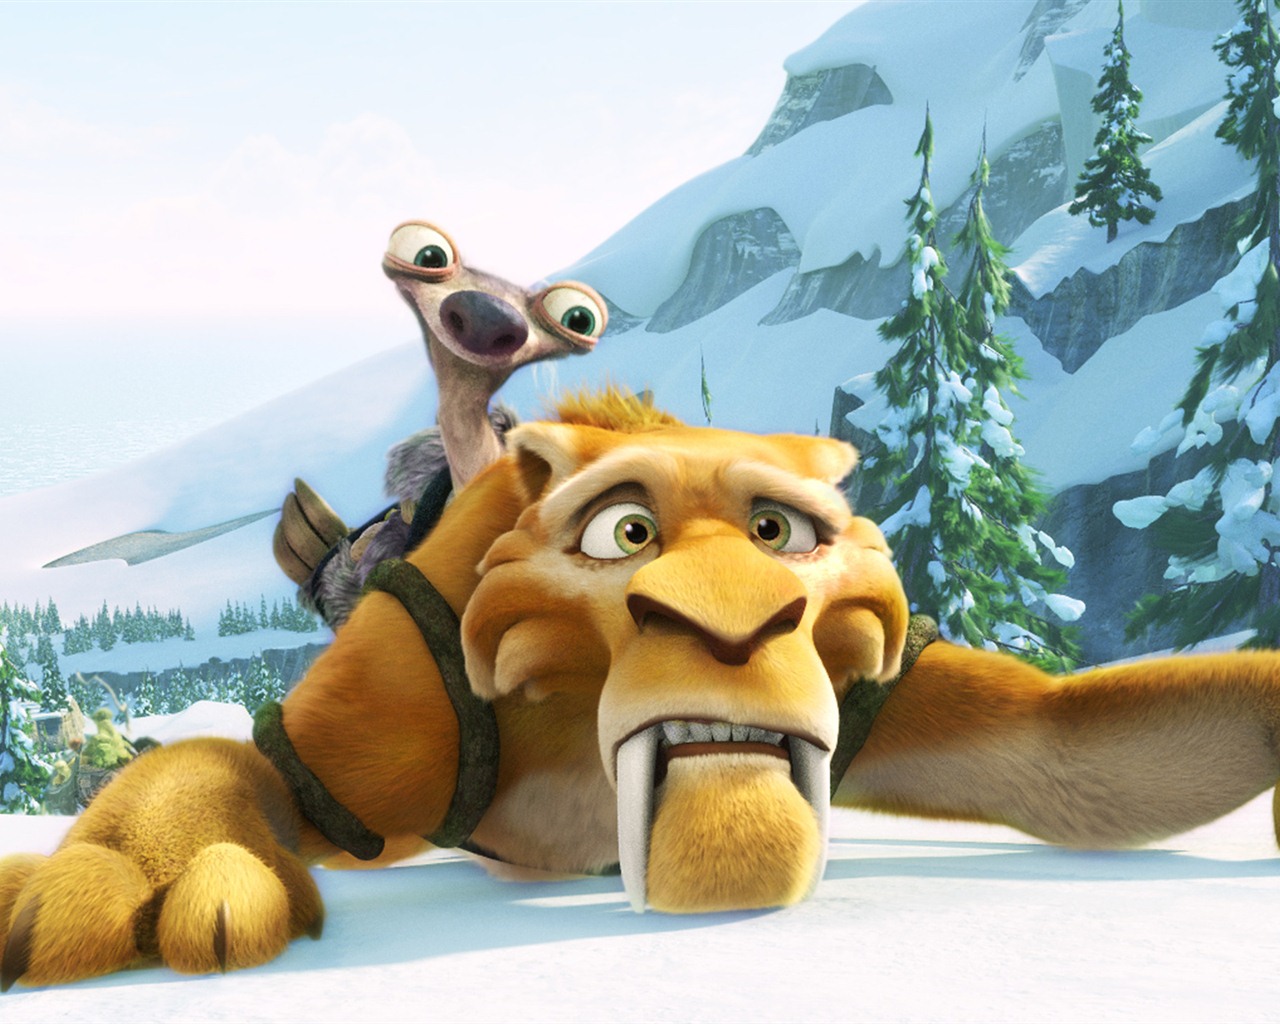 Ice Age: Continental Drift for android download